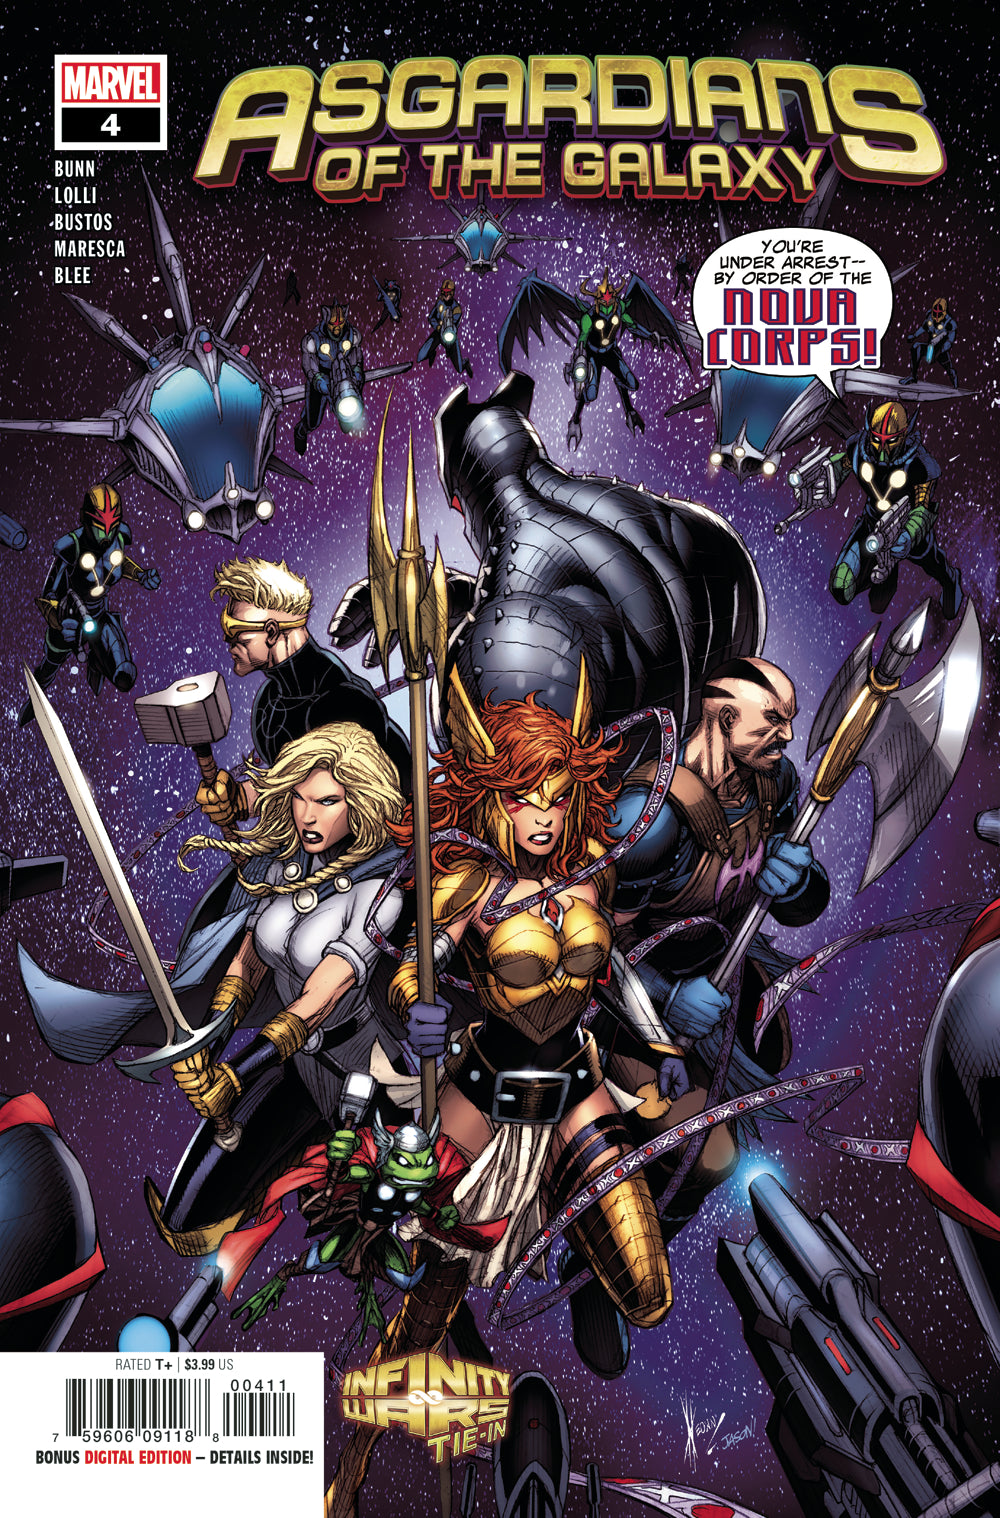 ASGARDIANS OF THE GALAXY #4 COVER